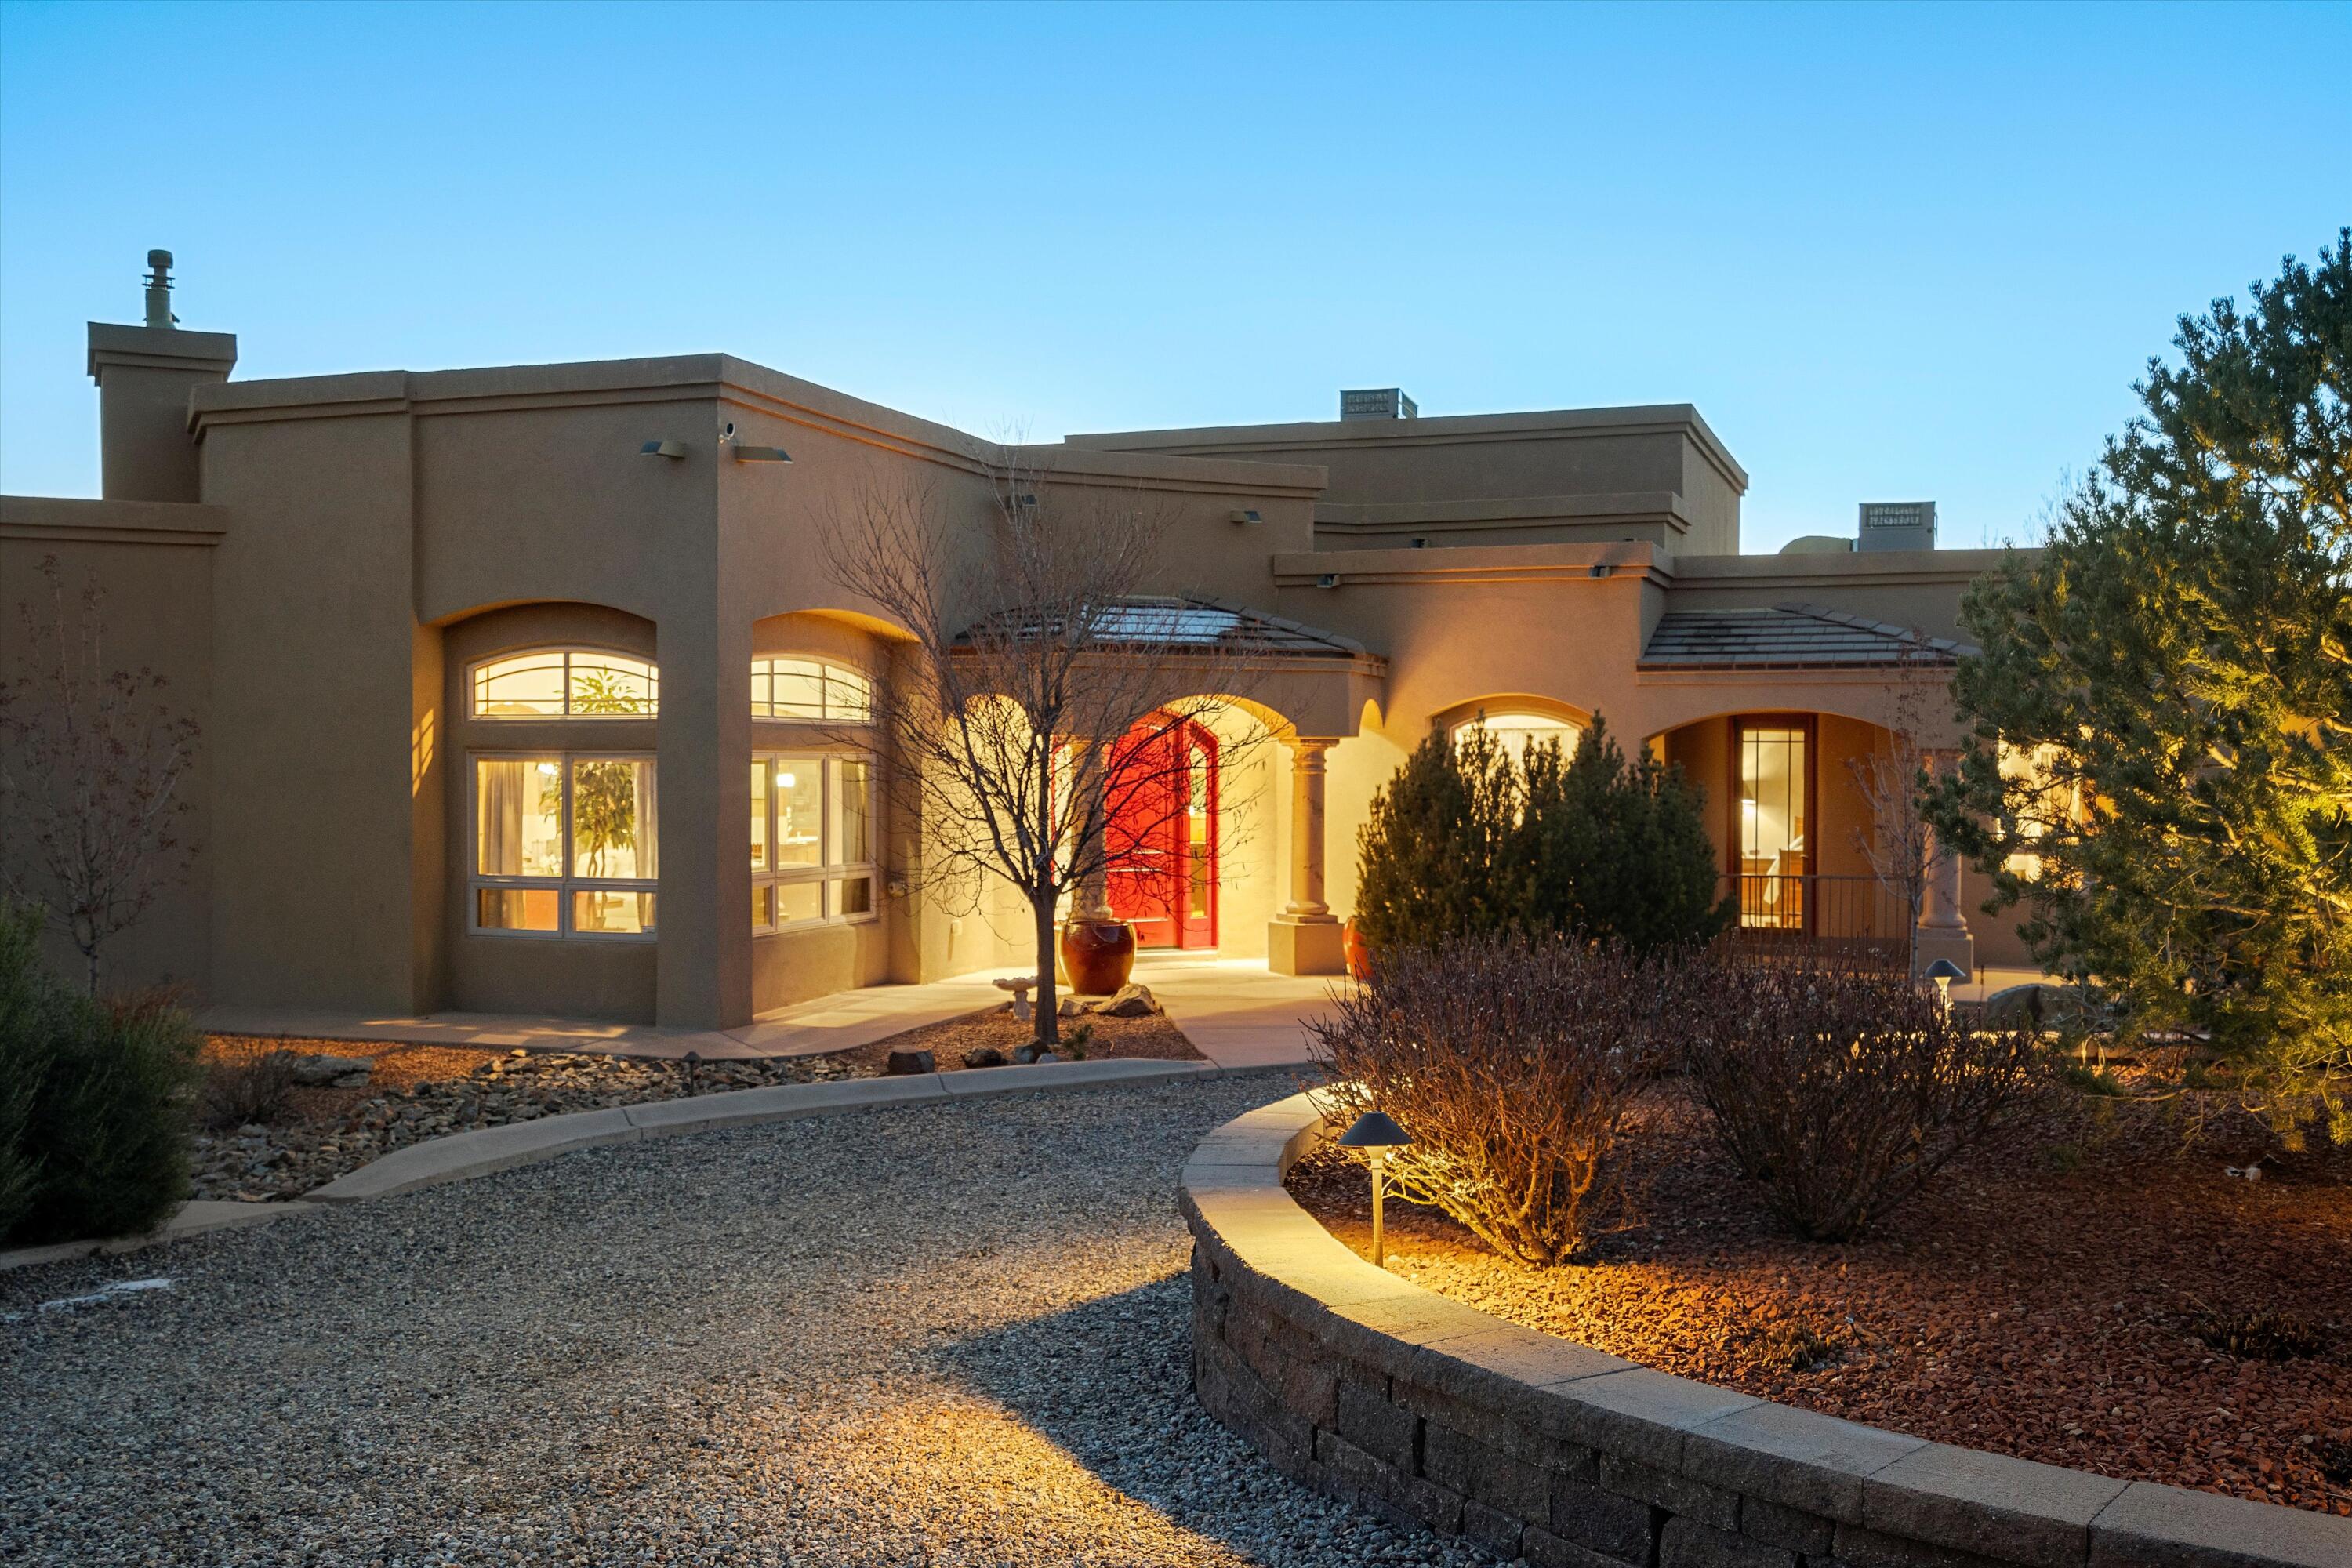 This gorgeous home in North Albuquerque Acres is a combination of elegant design and detail, gracefully arranged to provide superior comfort. This home is nestled in a beautifully landscaped and privately gated .89 acre lot. You will get to enjoy features like  beautiful VIEWS from its covered balconies and large private patios. A cozy retreat area featuring a heated endless pool next to a beautiful kiva fireplace awaits you. This practical and versatile floorplan offers over 4700 sqft of living area, which includes a detached guest house of almost 1,000 sqft. Detached building also houses a large RV garage and tons of storage space. There is an amazing large greenhouse where you can plant year round. All of this is powered by owned solar panels. Come and see for yourself!